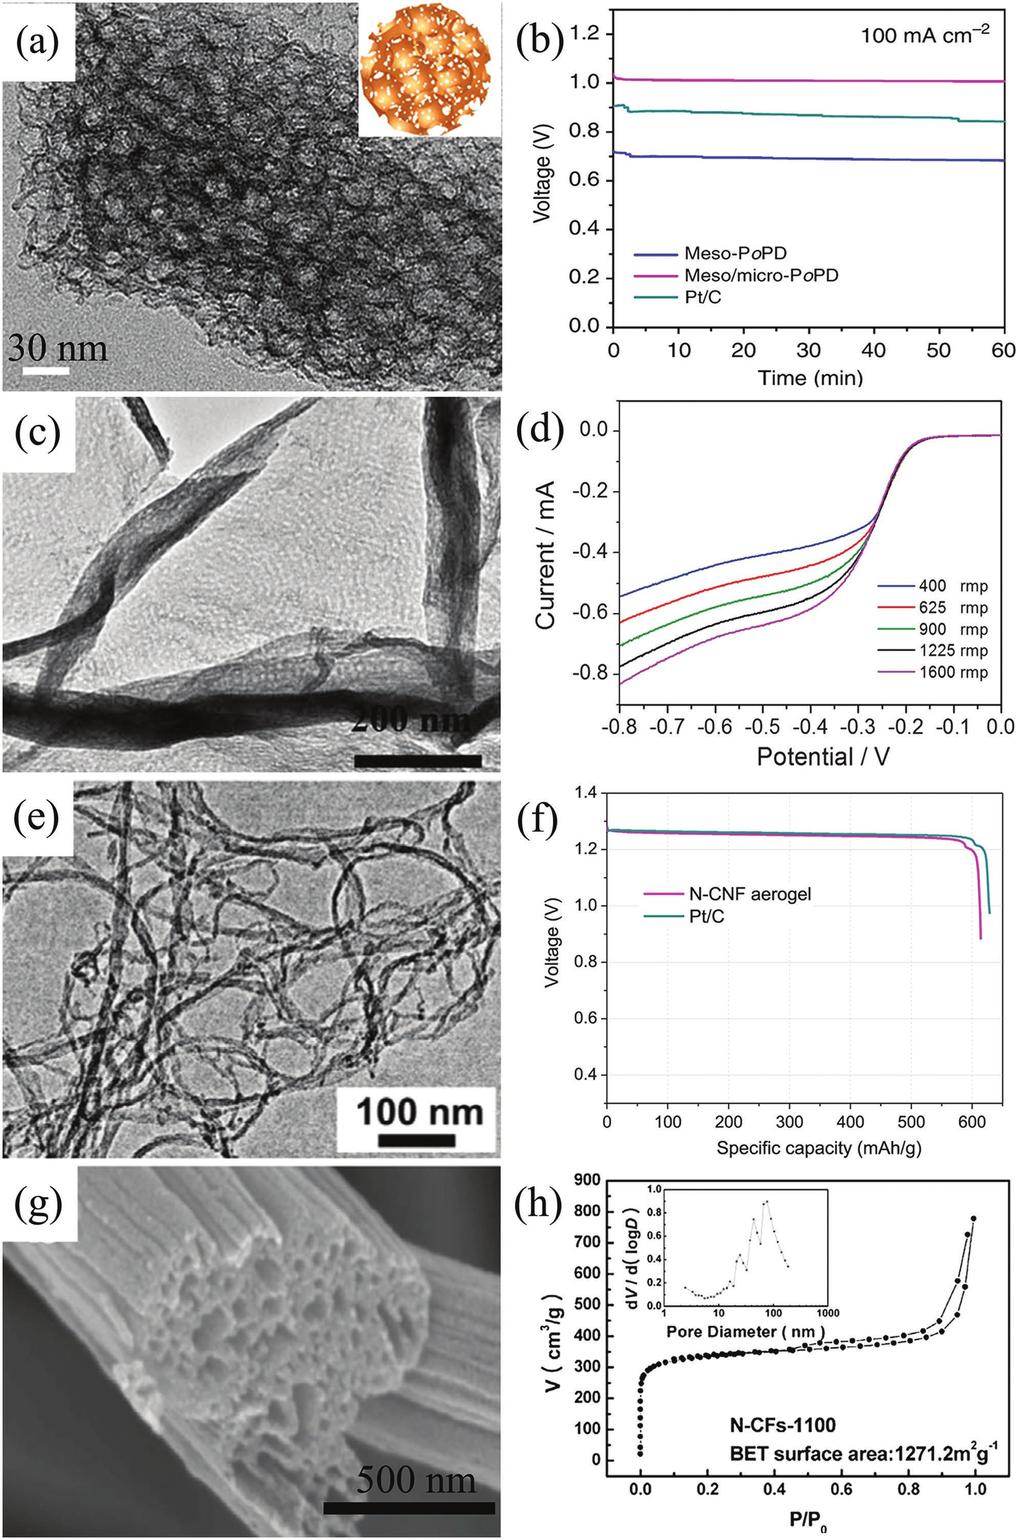 Figure 2. TEM image (a) and galvanostatic discharge curves of hierarchical N-doped porous carbon (b). Reproduced with permission. [130] Copyright 2014, Nature.